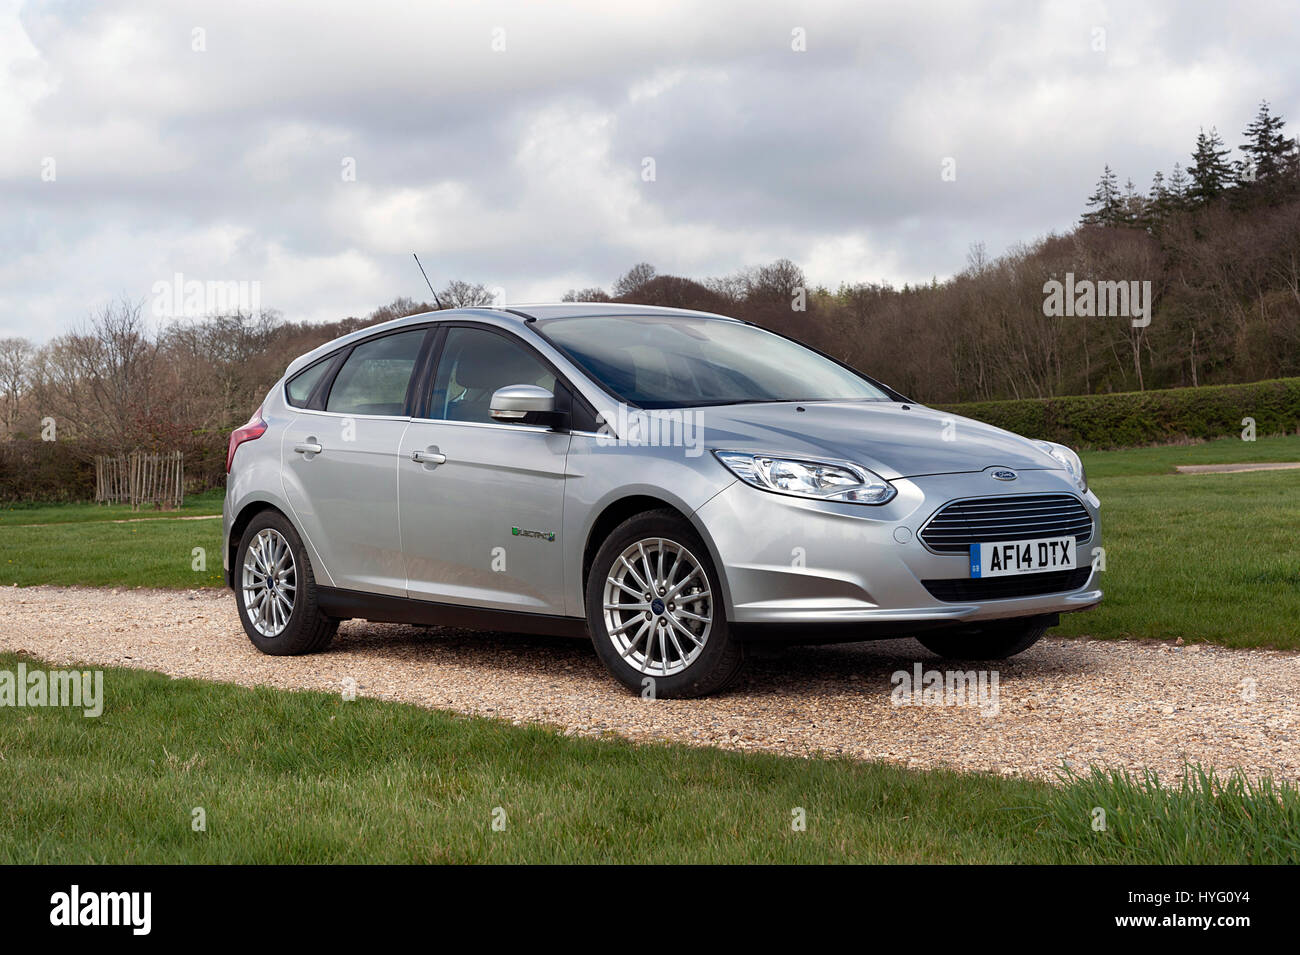 2014 Ford Focus Electric car Stock Photo